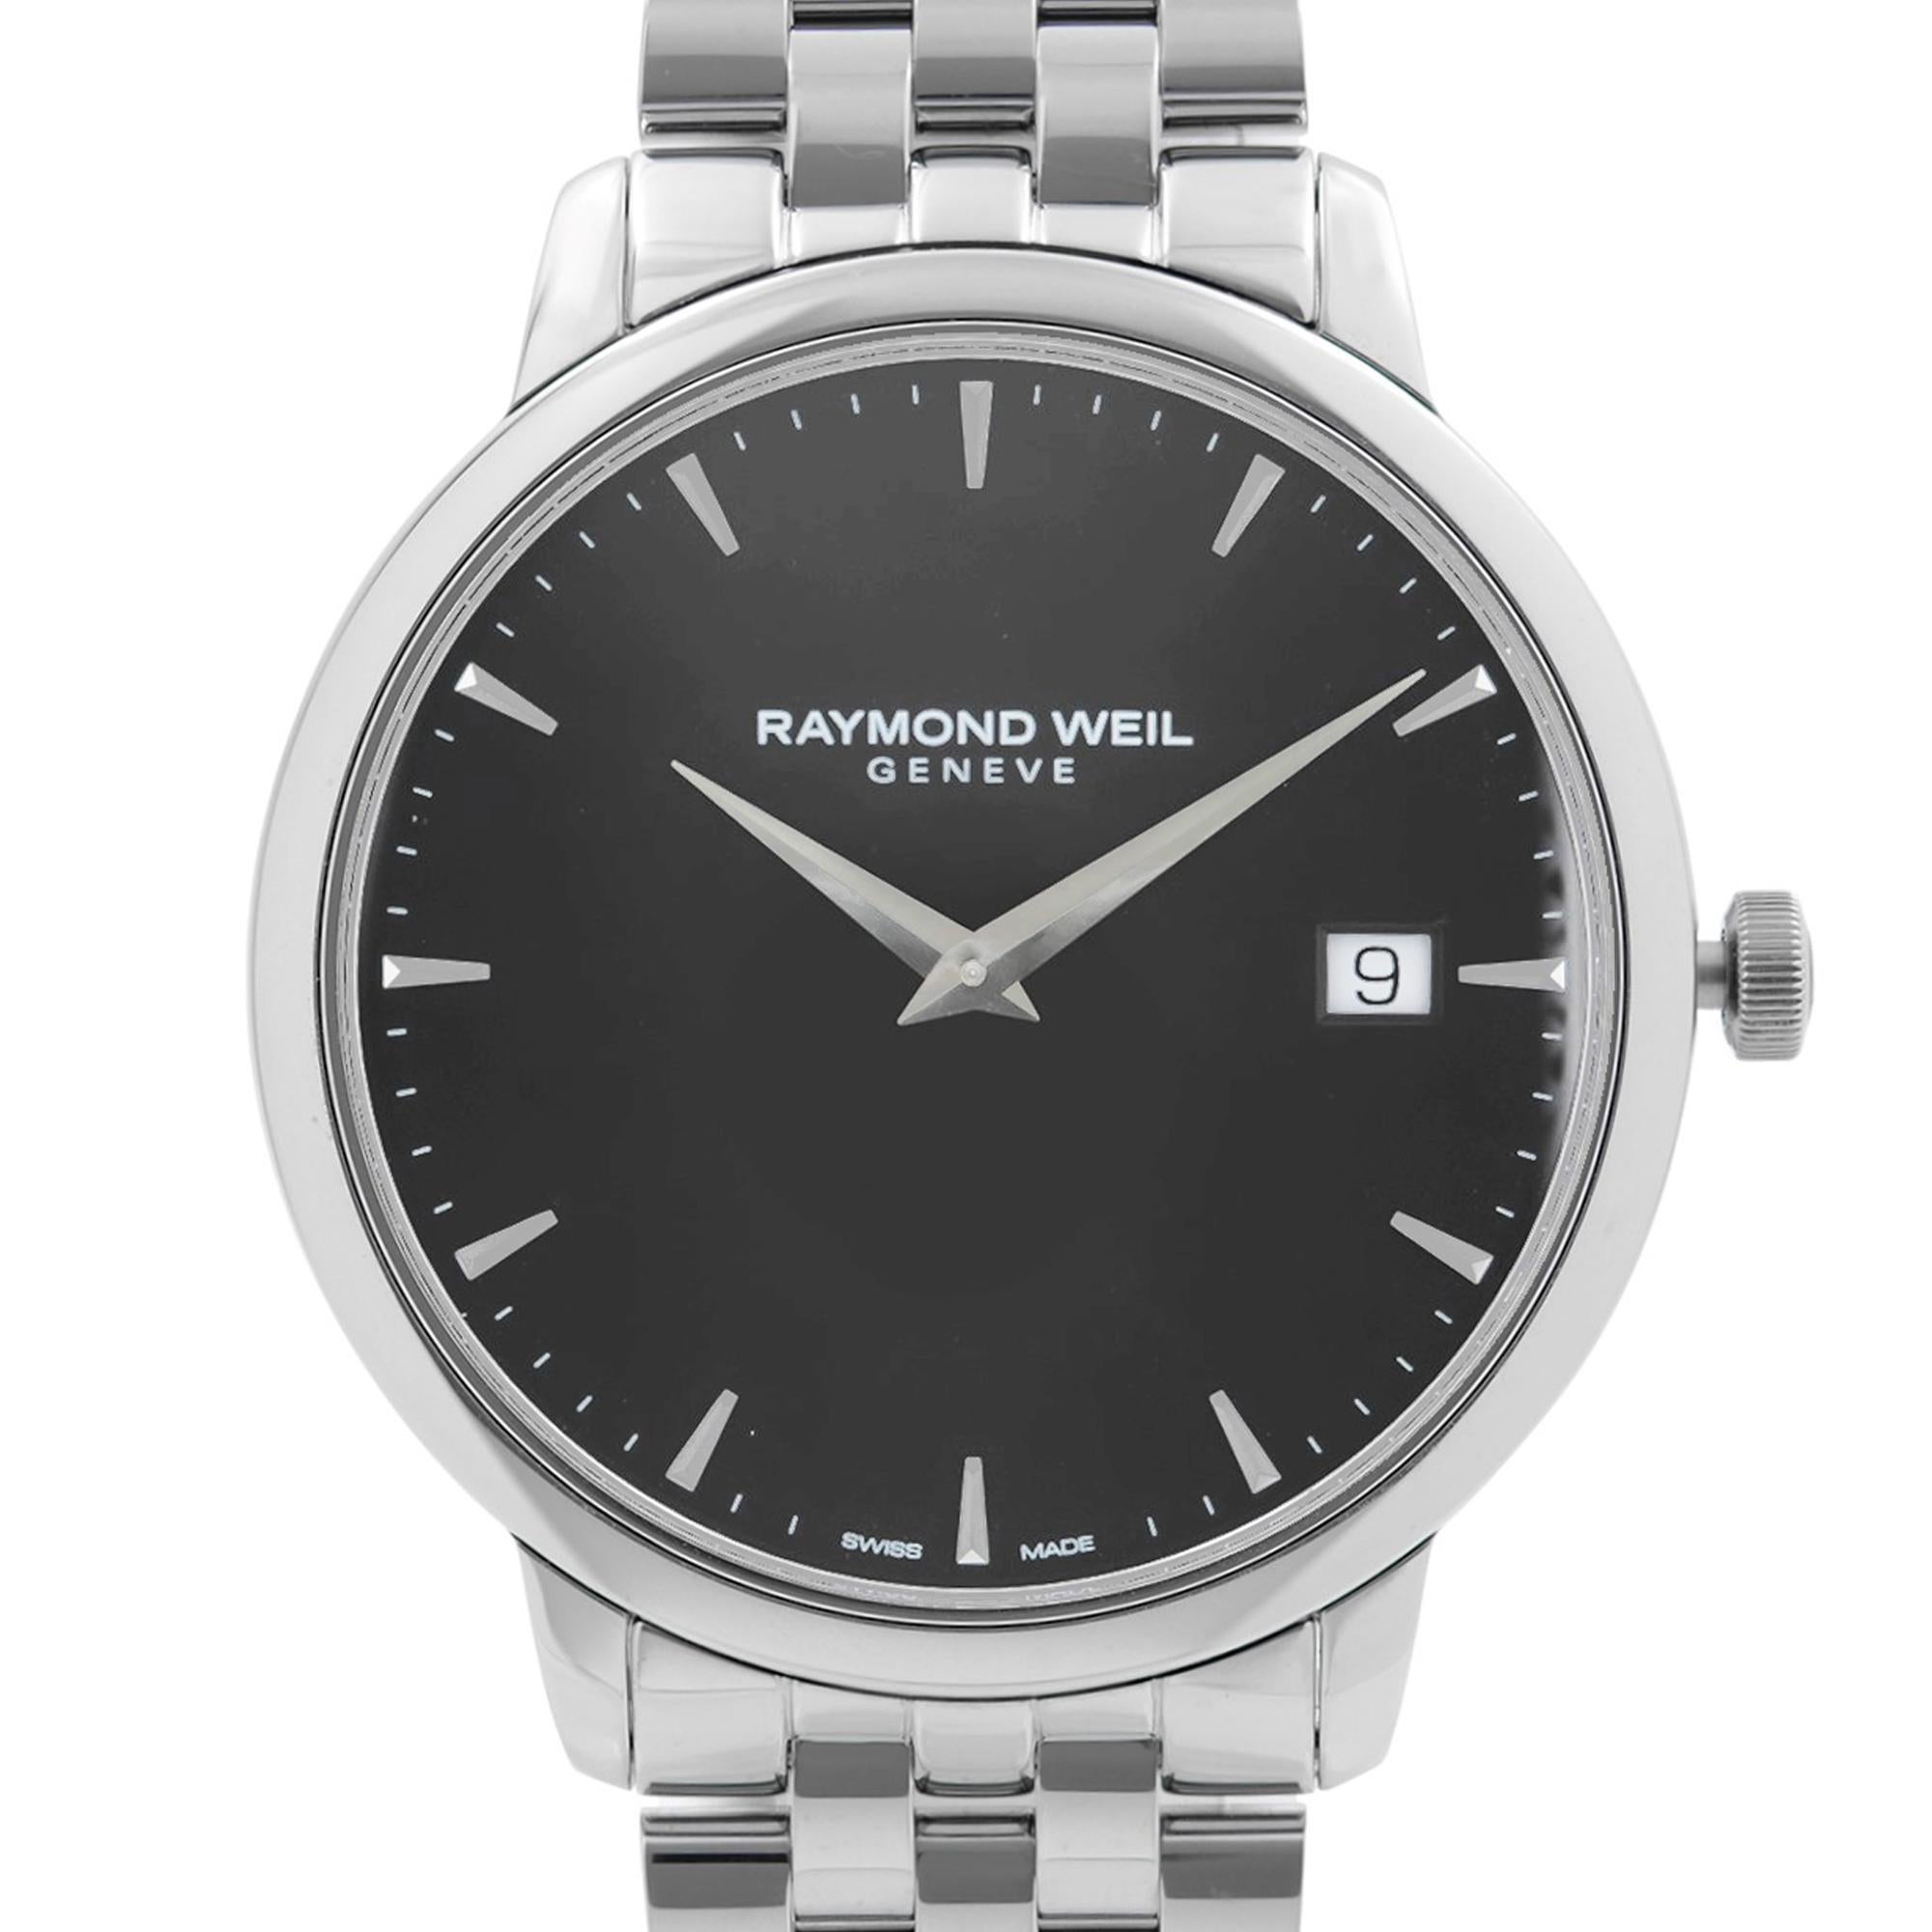 New with Defects. There are only a few tiny marks on the dial visible under certain light and close inspection. 

Brand: RAYMOND WEIL  Type: Wristwatch  Department: Men  Model Number: 5588-ST-20001  Country/Region of Manufacture: Switzerland  Style: